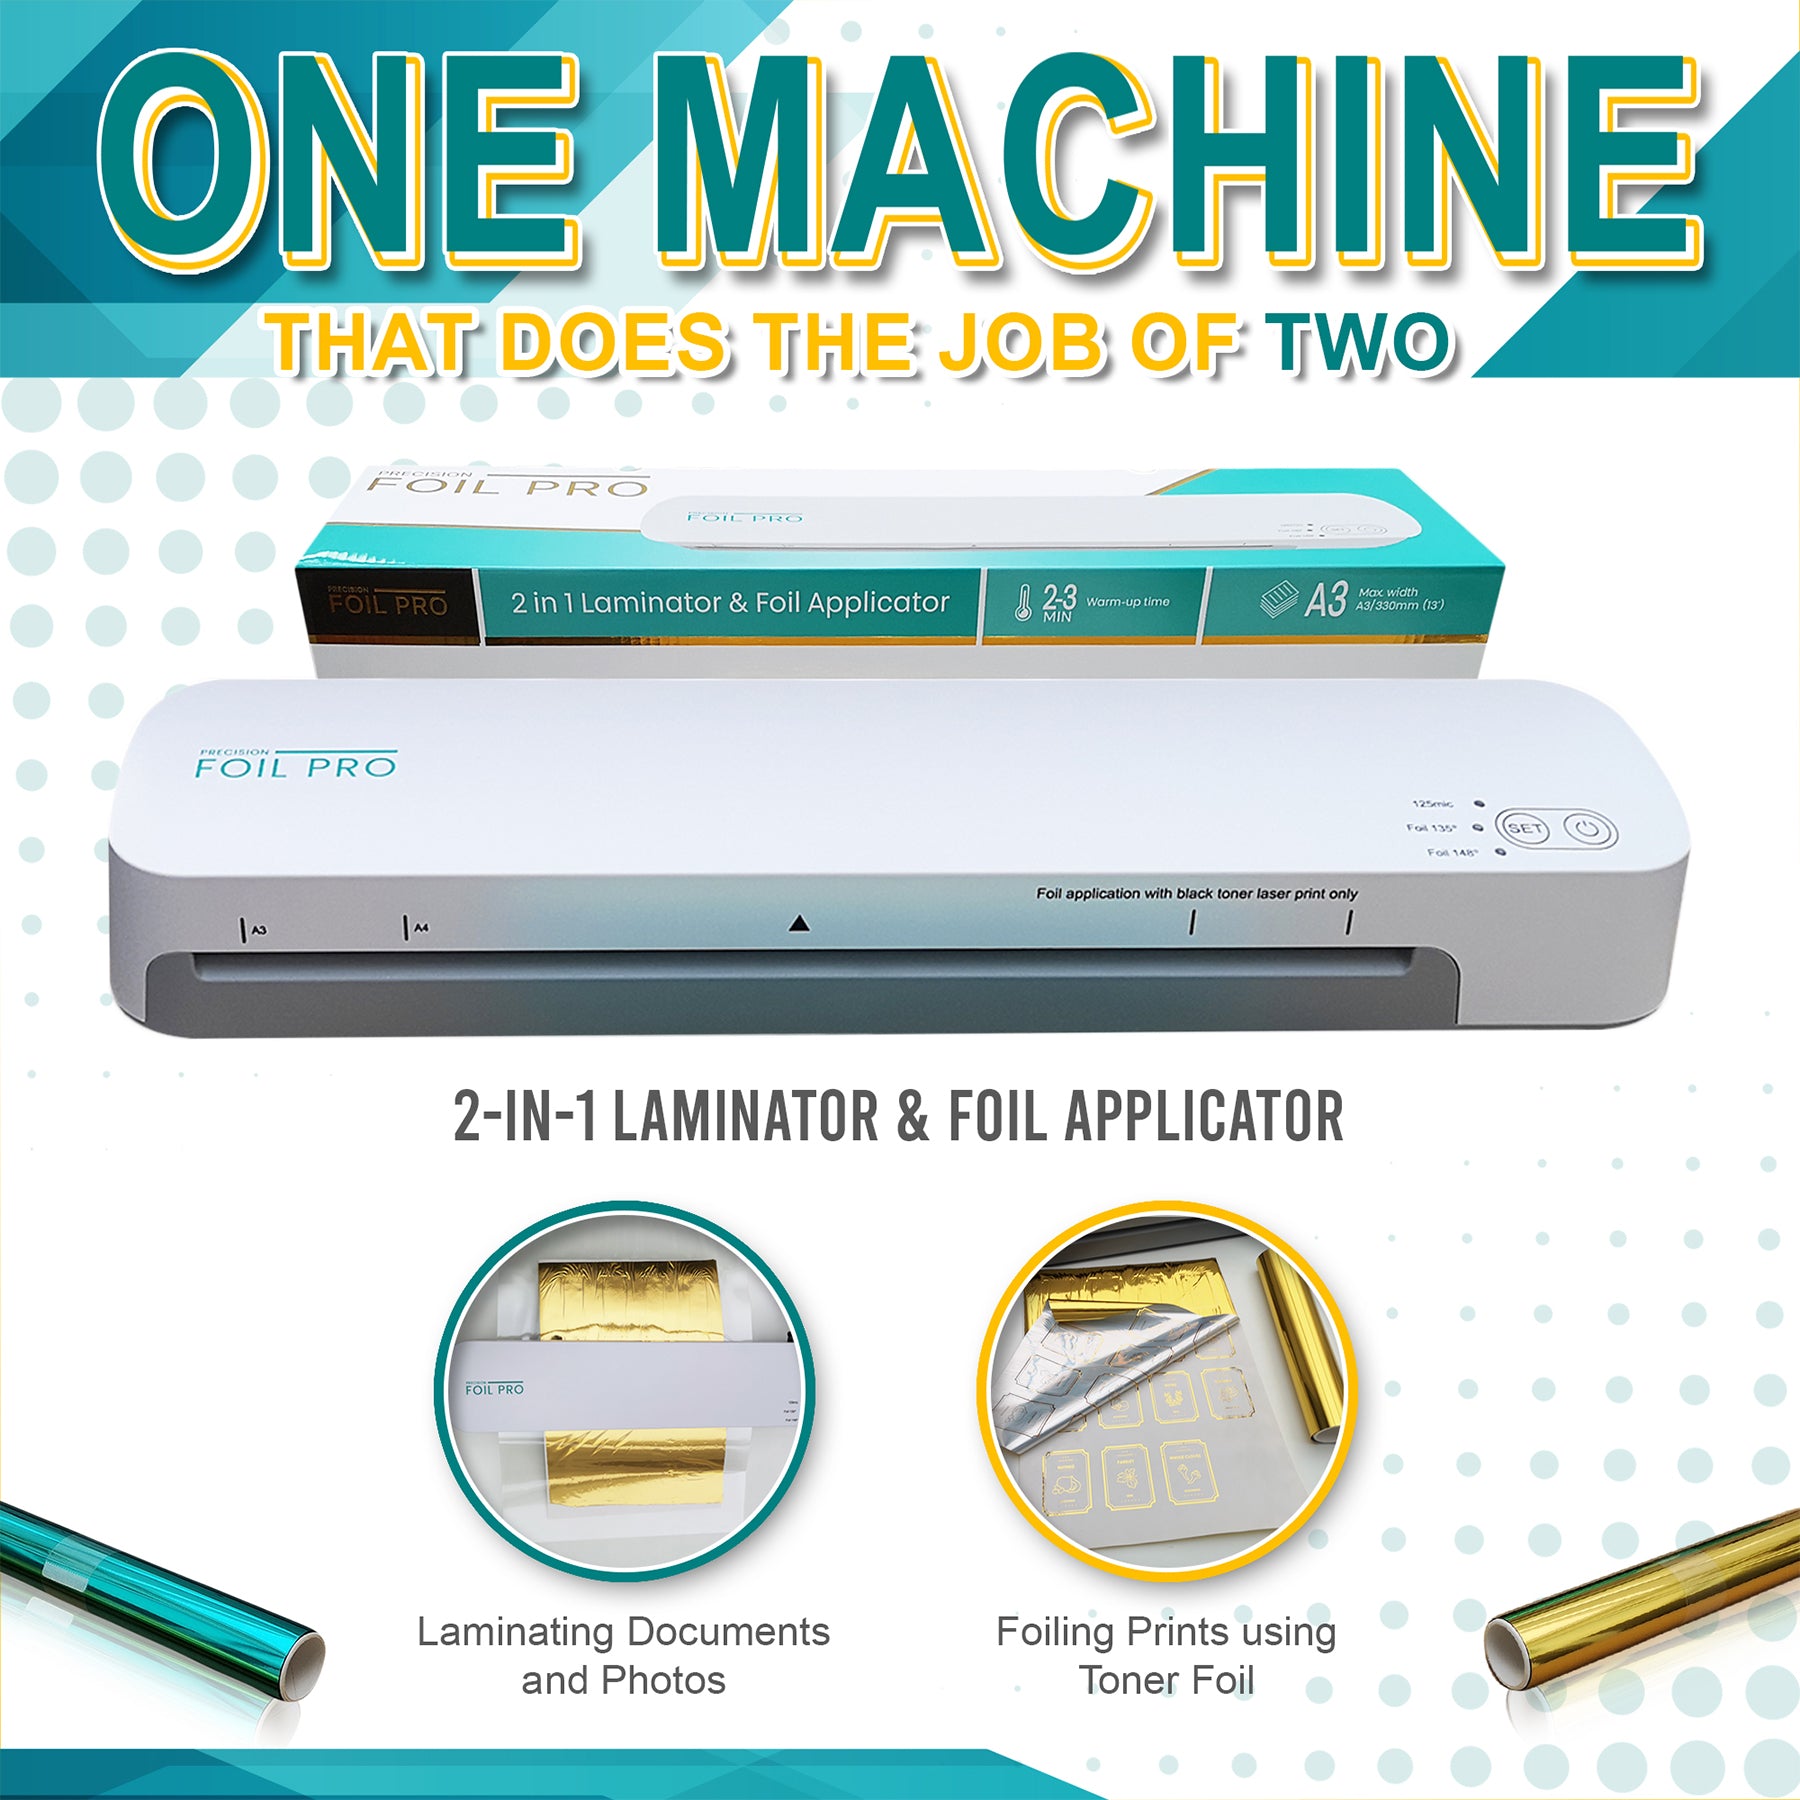 Precision Foil Pro - The Ultimate 2-in-1 Foil Applicator and Laminator for Crafting Enthusiasts